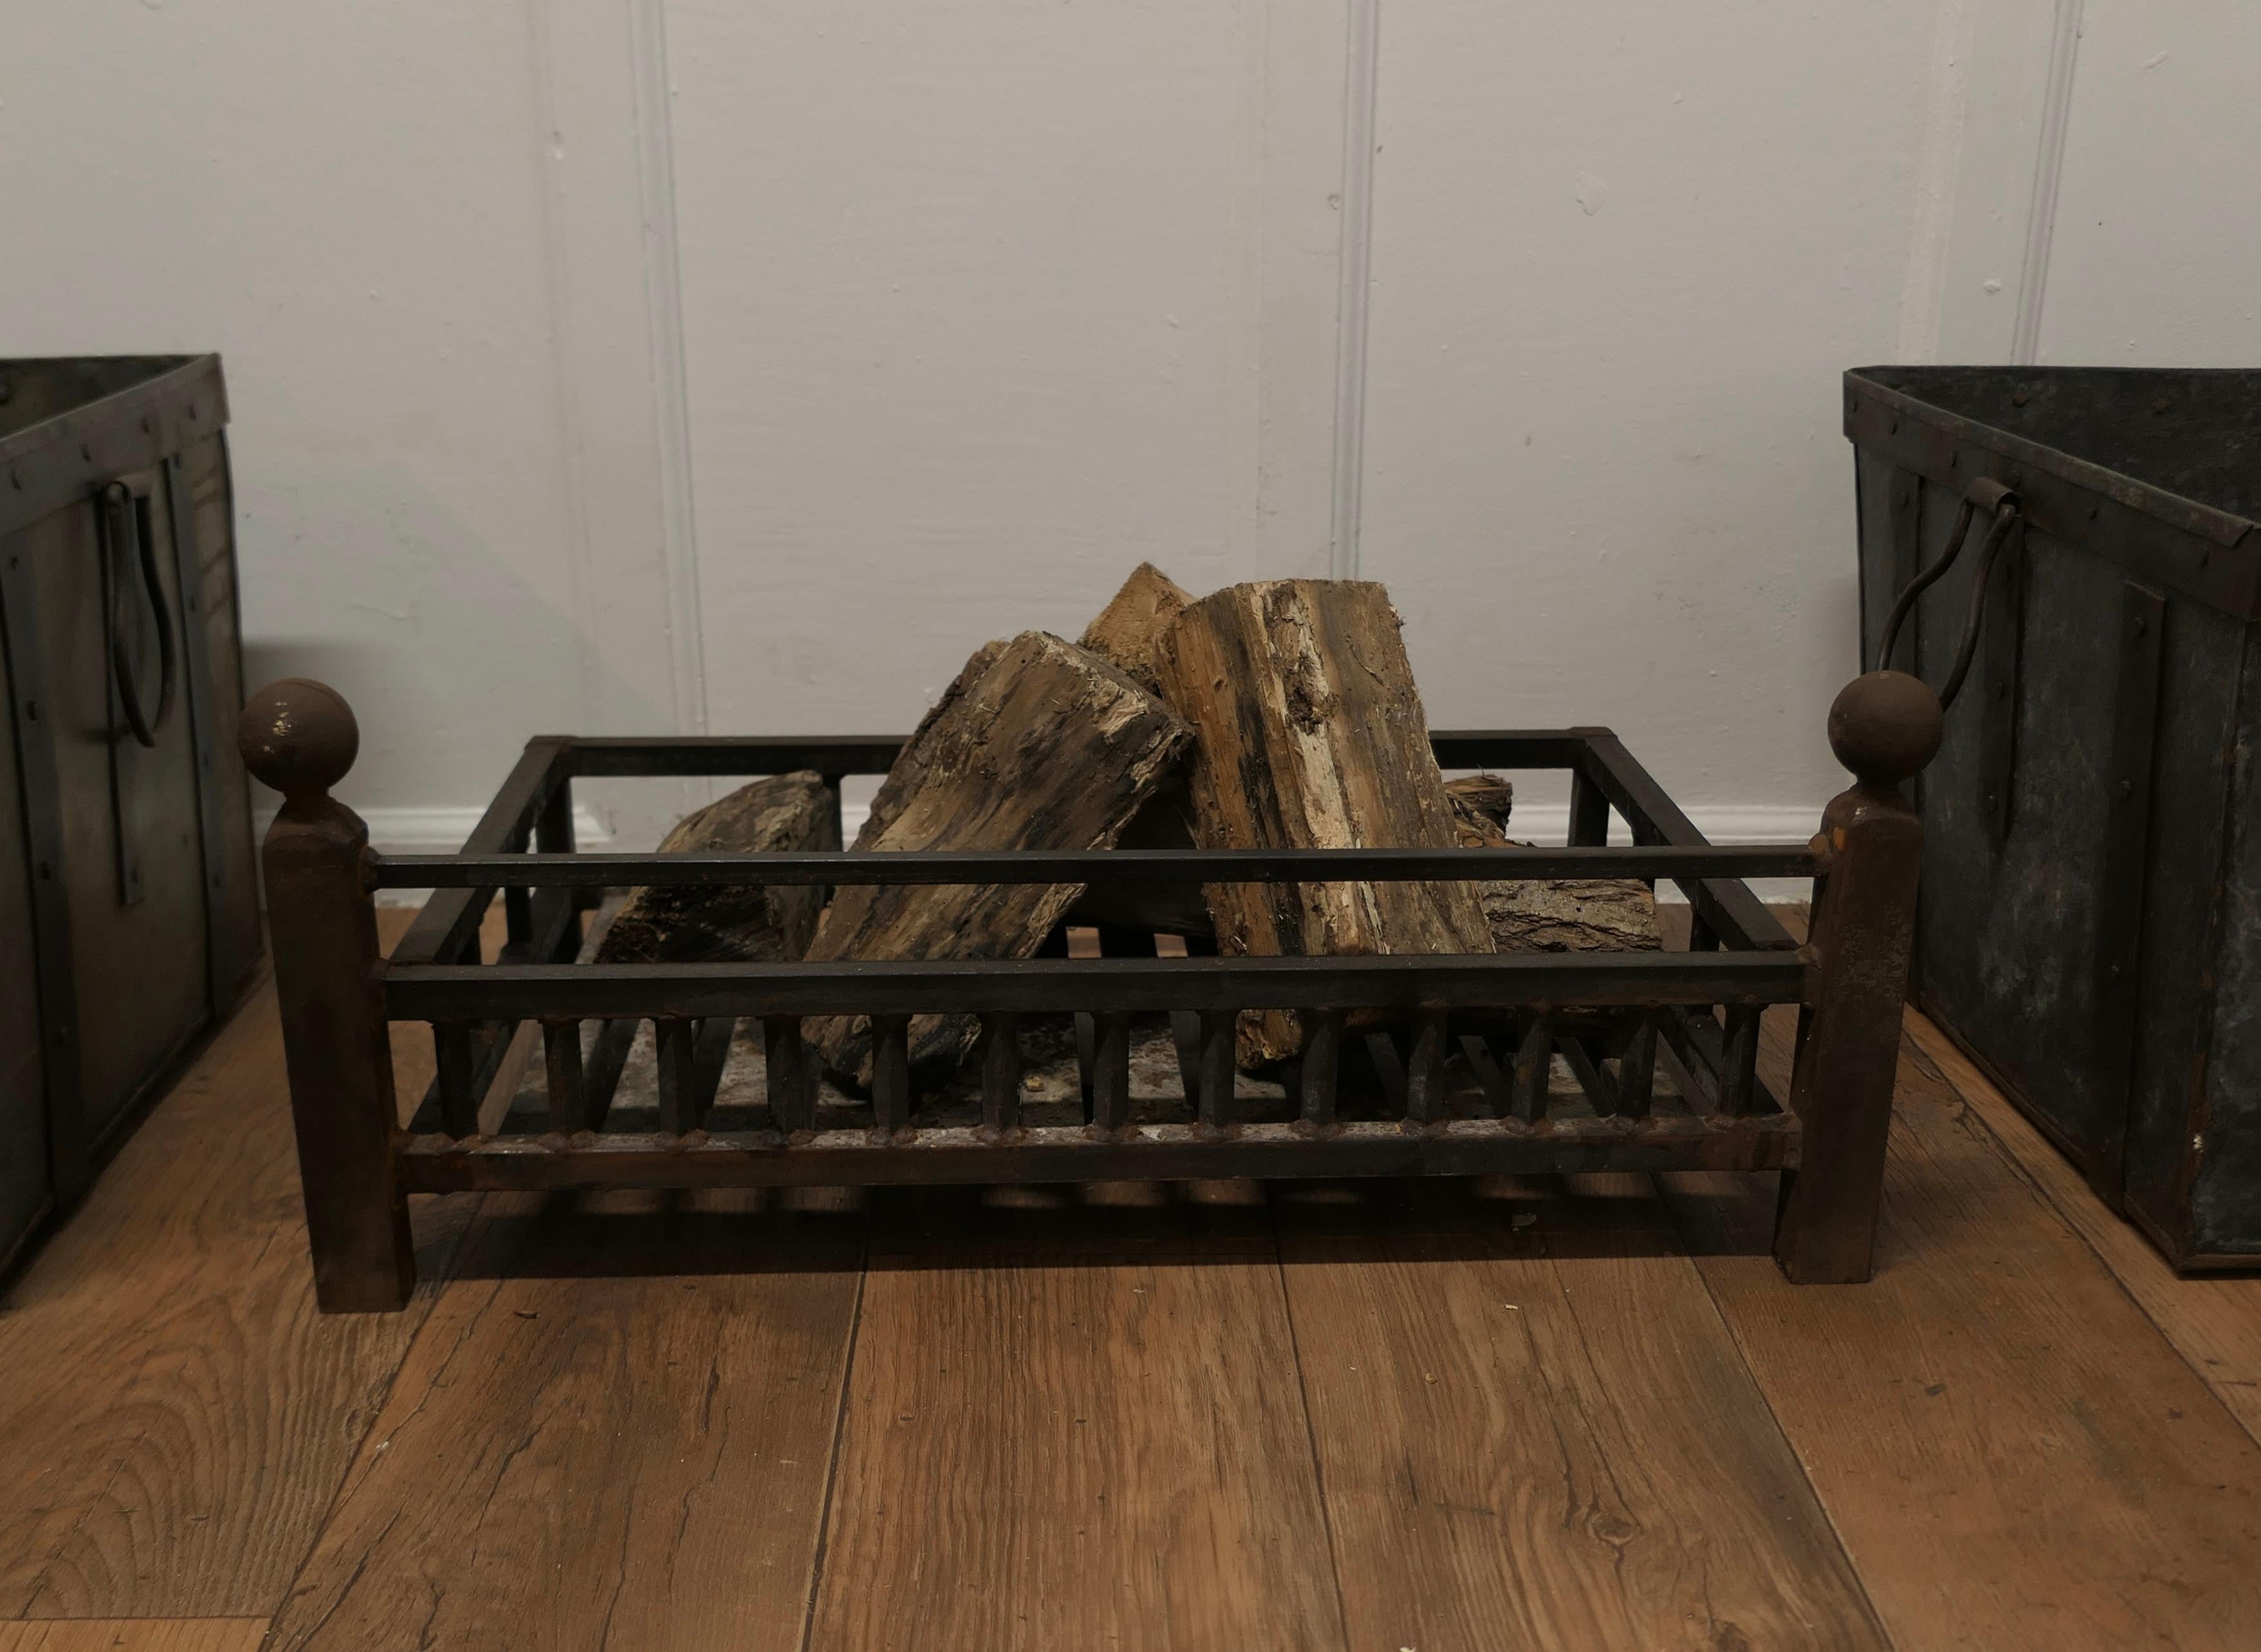 Adam Style Inglenook Iron Fire Grate    The grate is made in iron with rails all around  For Sale